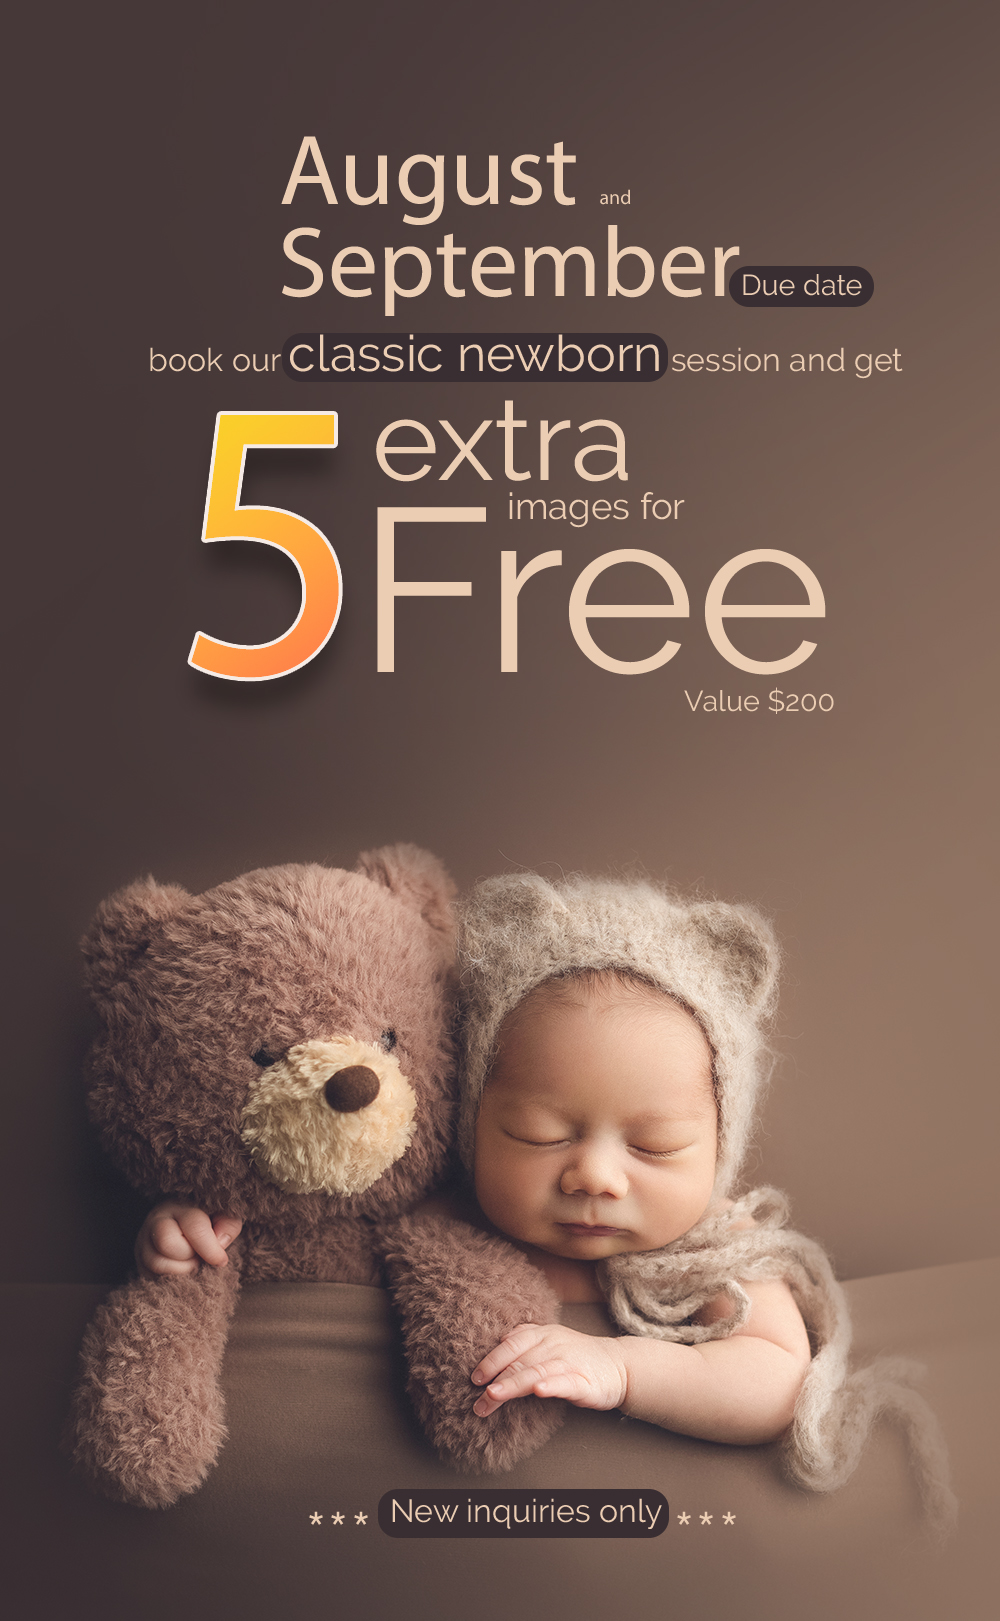 august and September  promotions - classic newborn photography